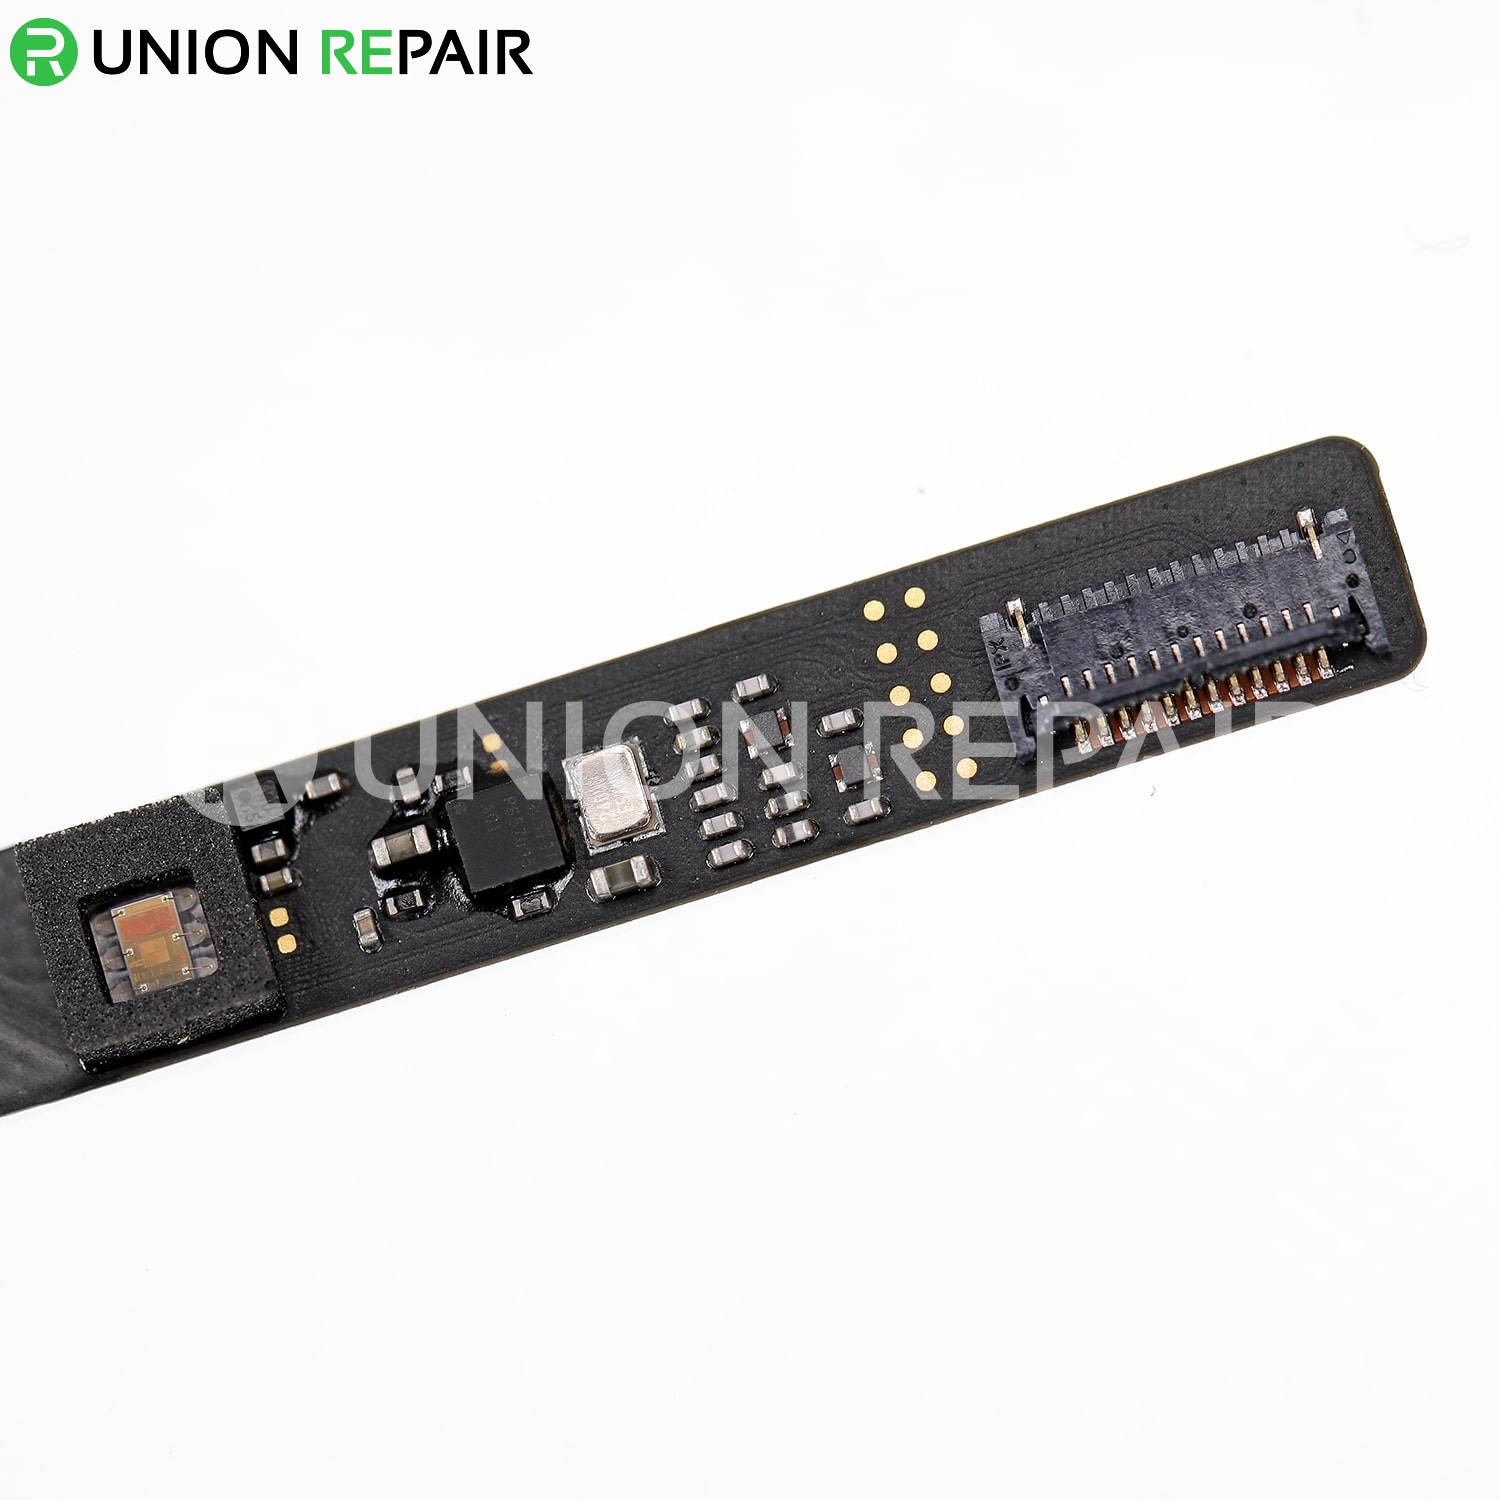 Front Camera for MacBook Pro A1706/A1708 (Late 2016, Mid 2017)